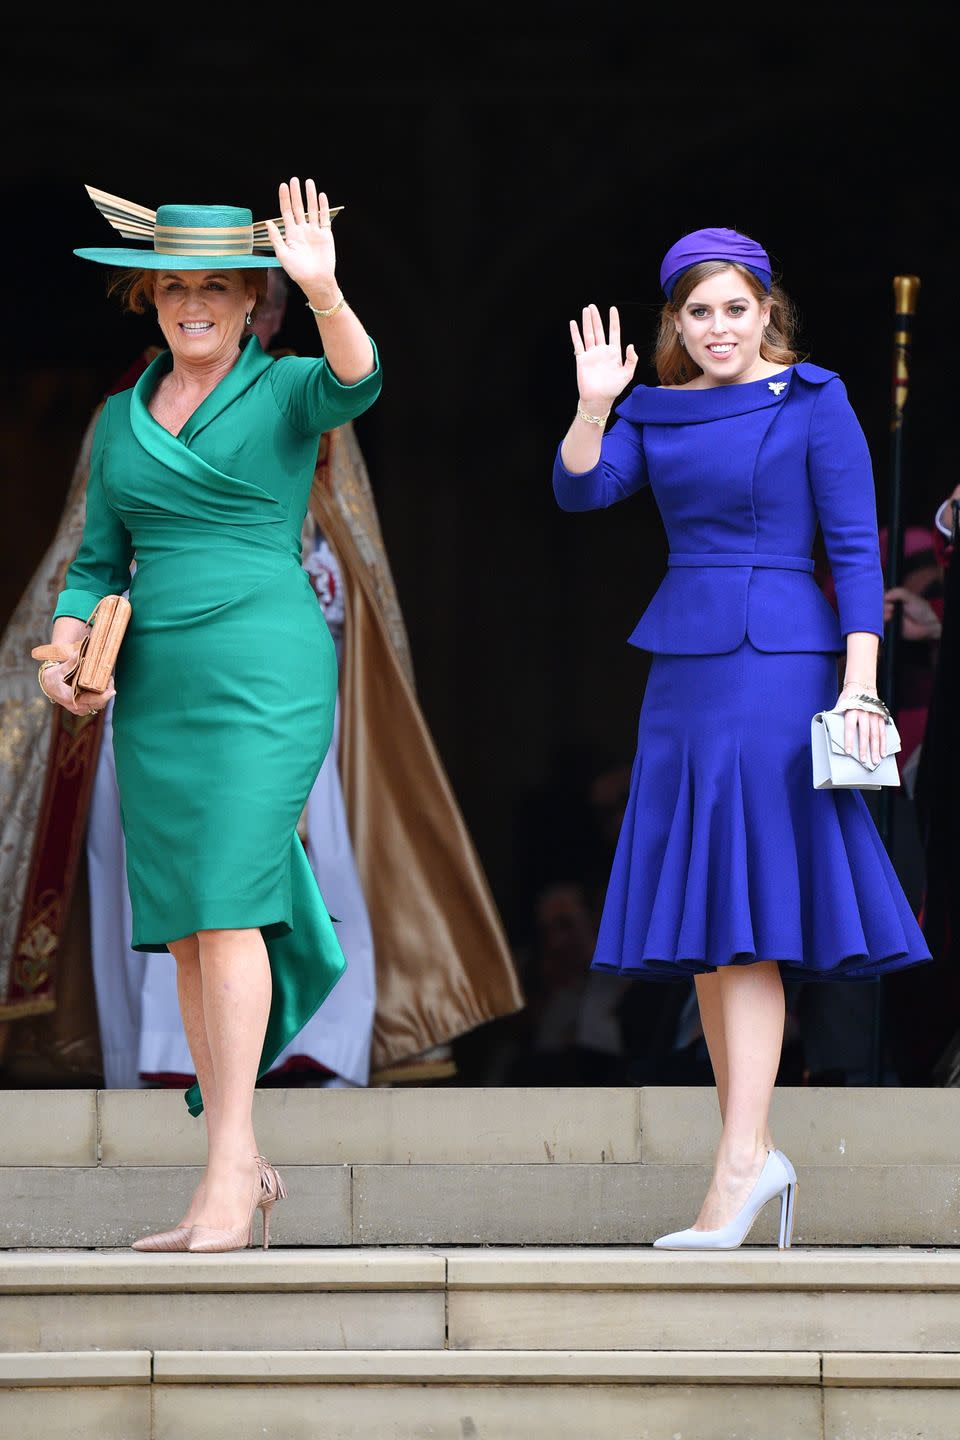 Sarah Ferguson, Duchess of York, and Princess Beatrice at St. George's Chapel in Windsor